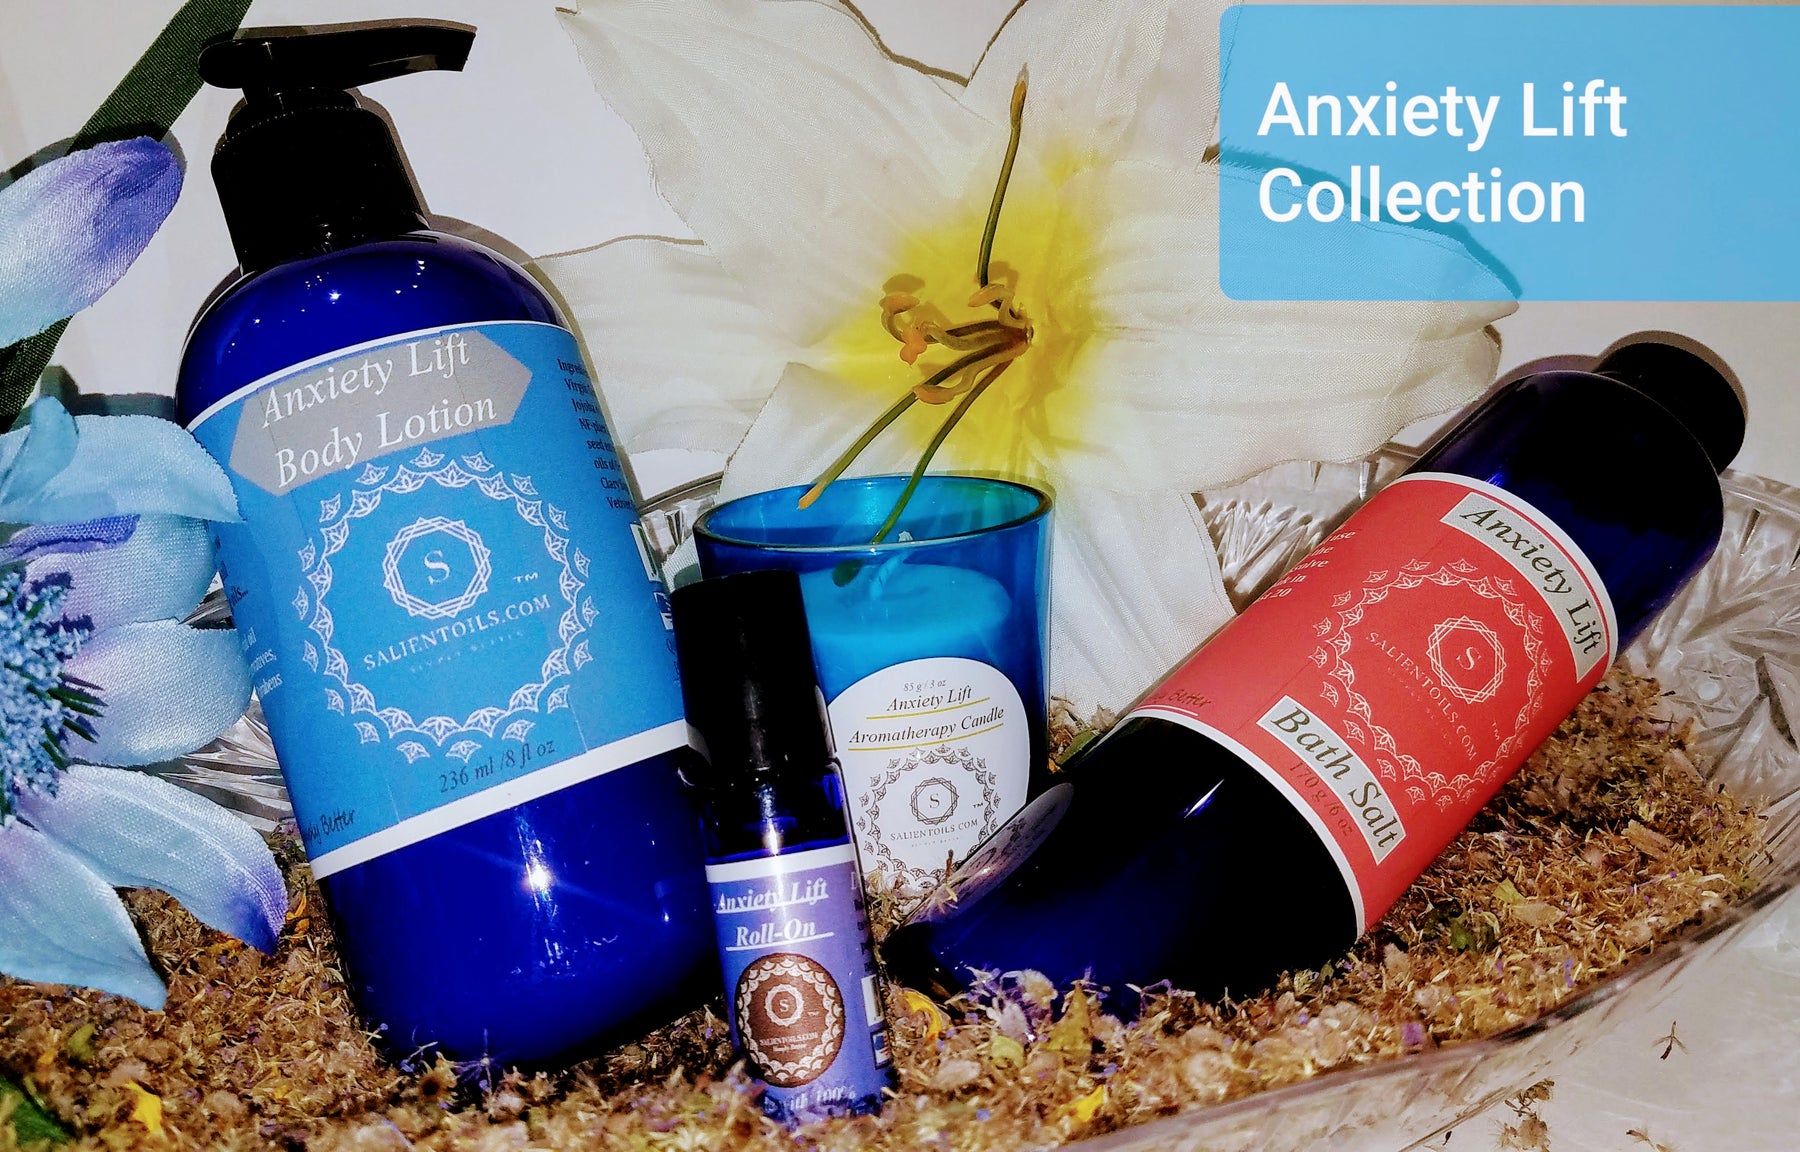 Anxiety Lift Collection